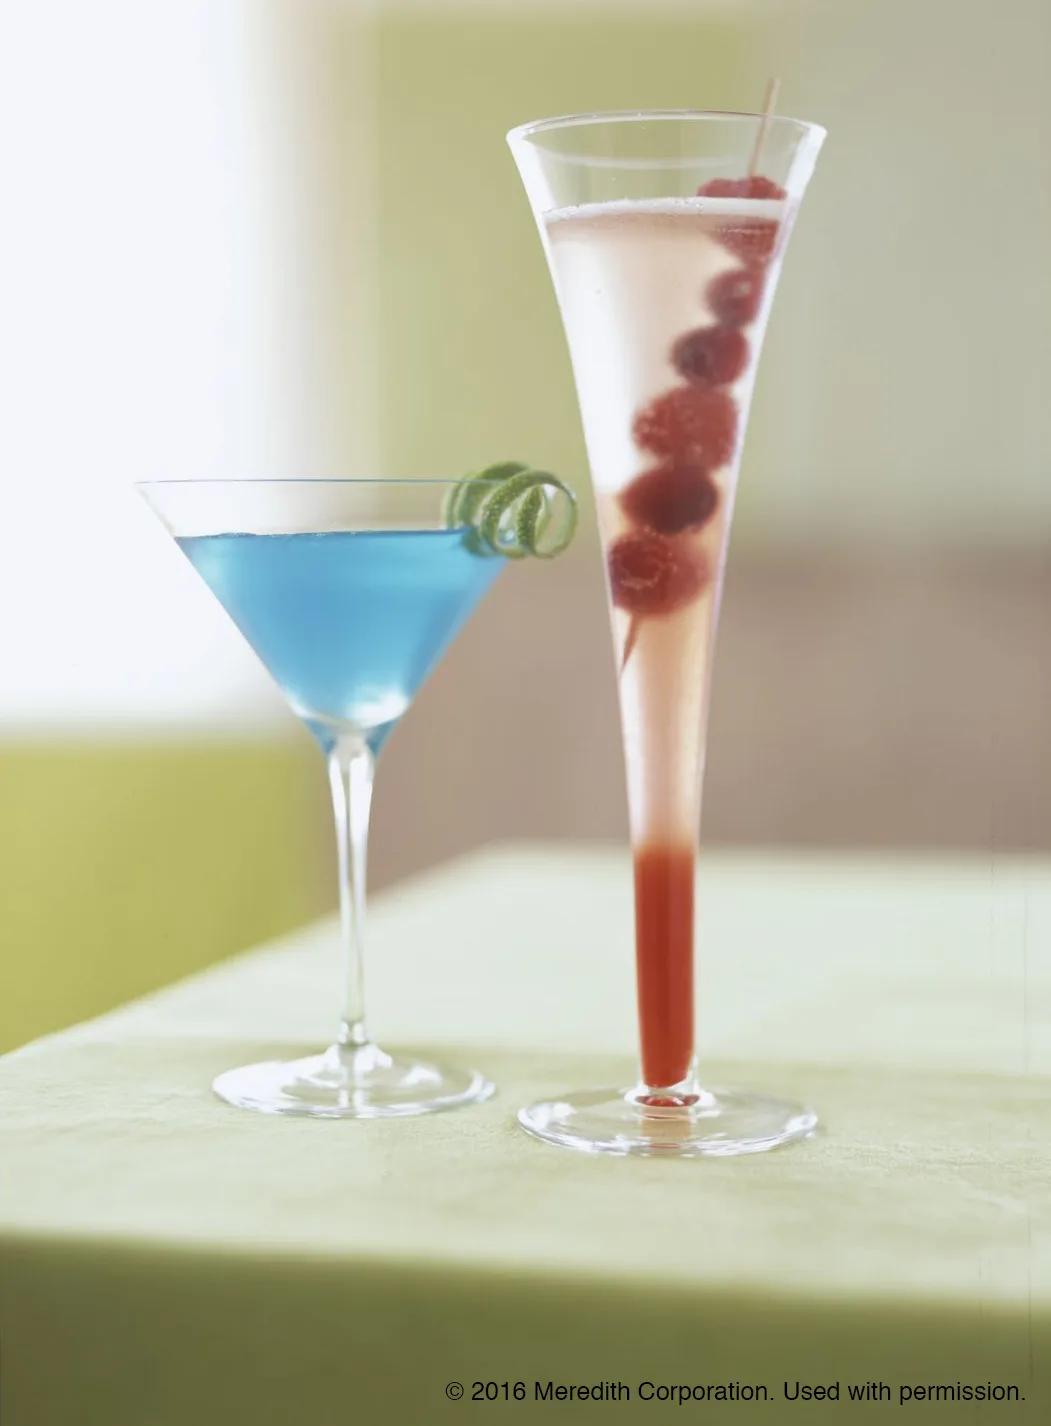 Festive Cocktails and Soothing Drinks to Liven Up Your Holiday